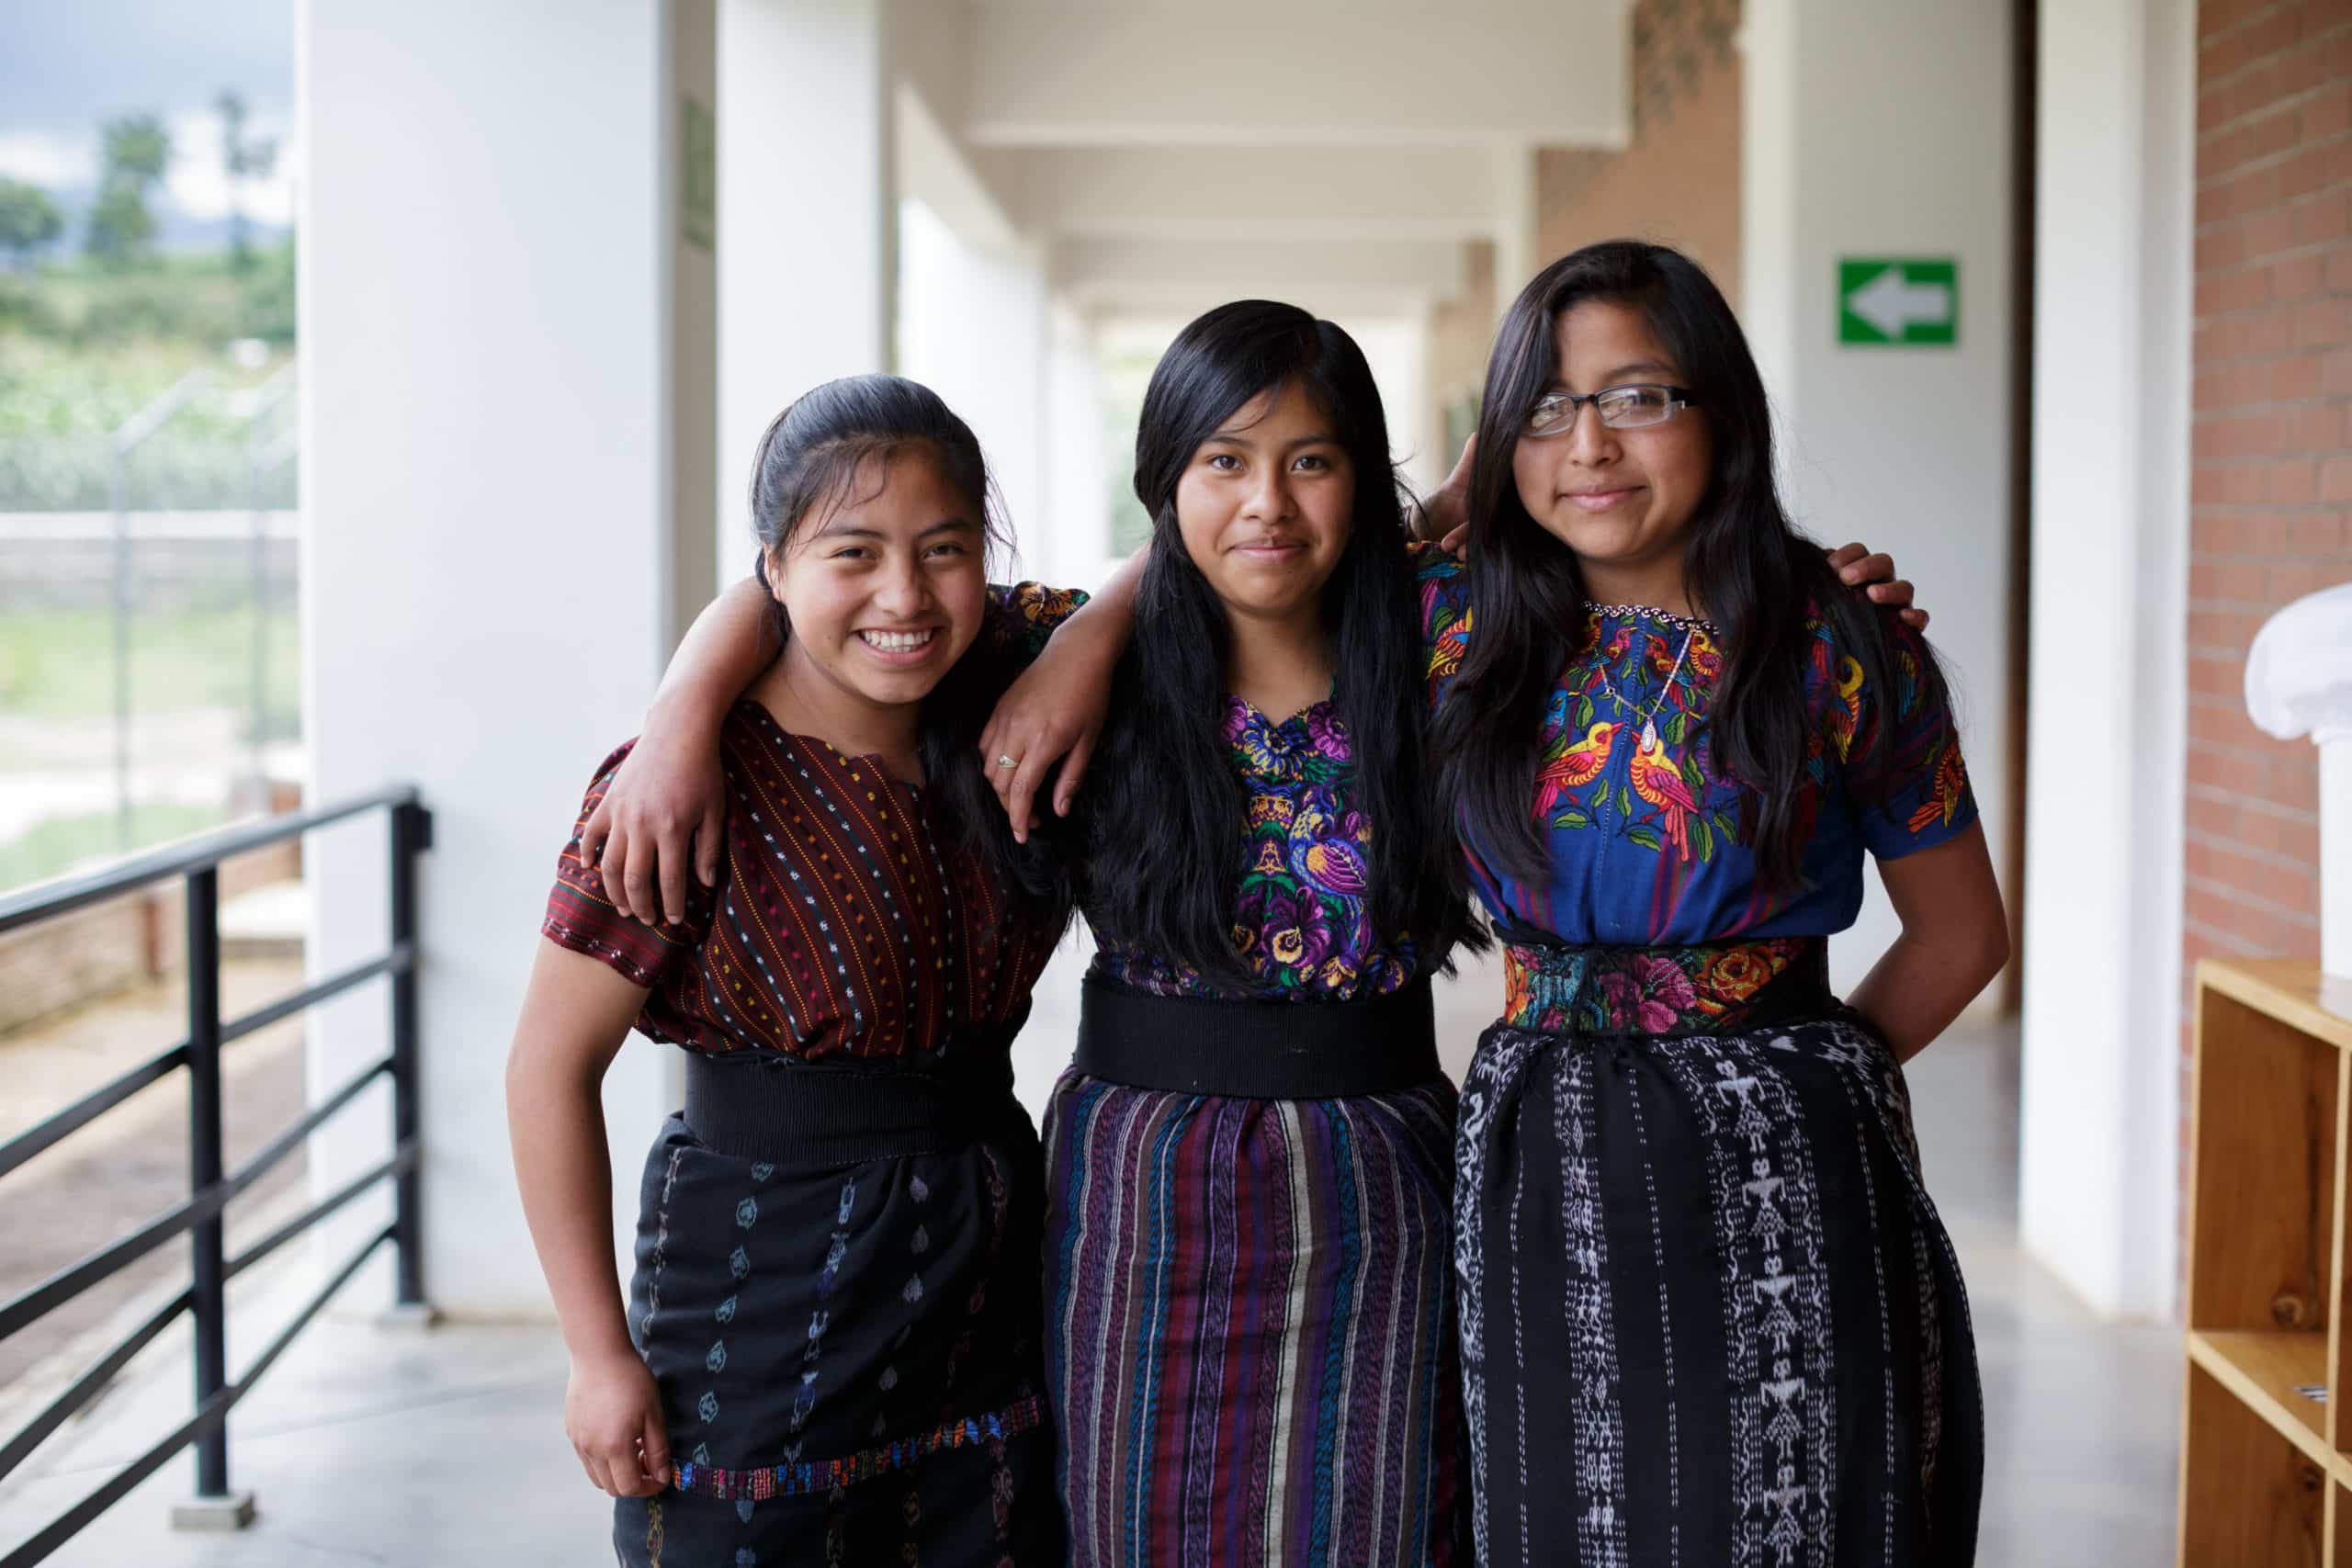 Students pose at the MAIA school. MAIA offers opportunities in quality education for Maya women.